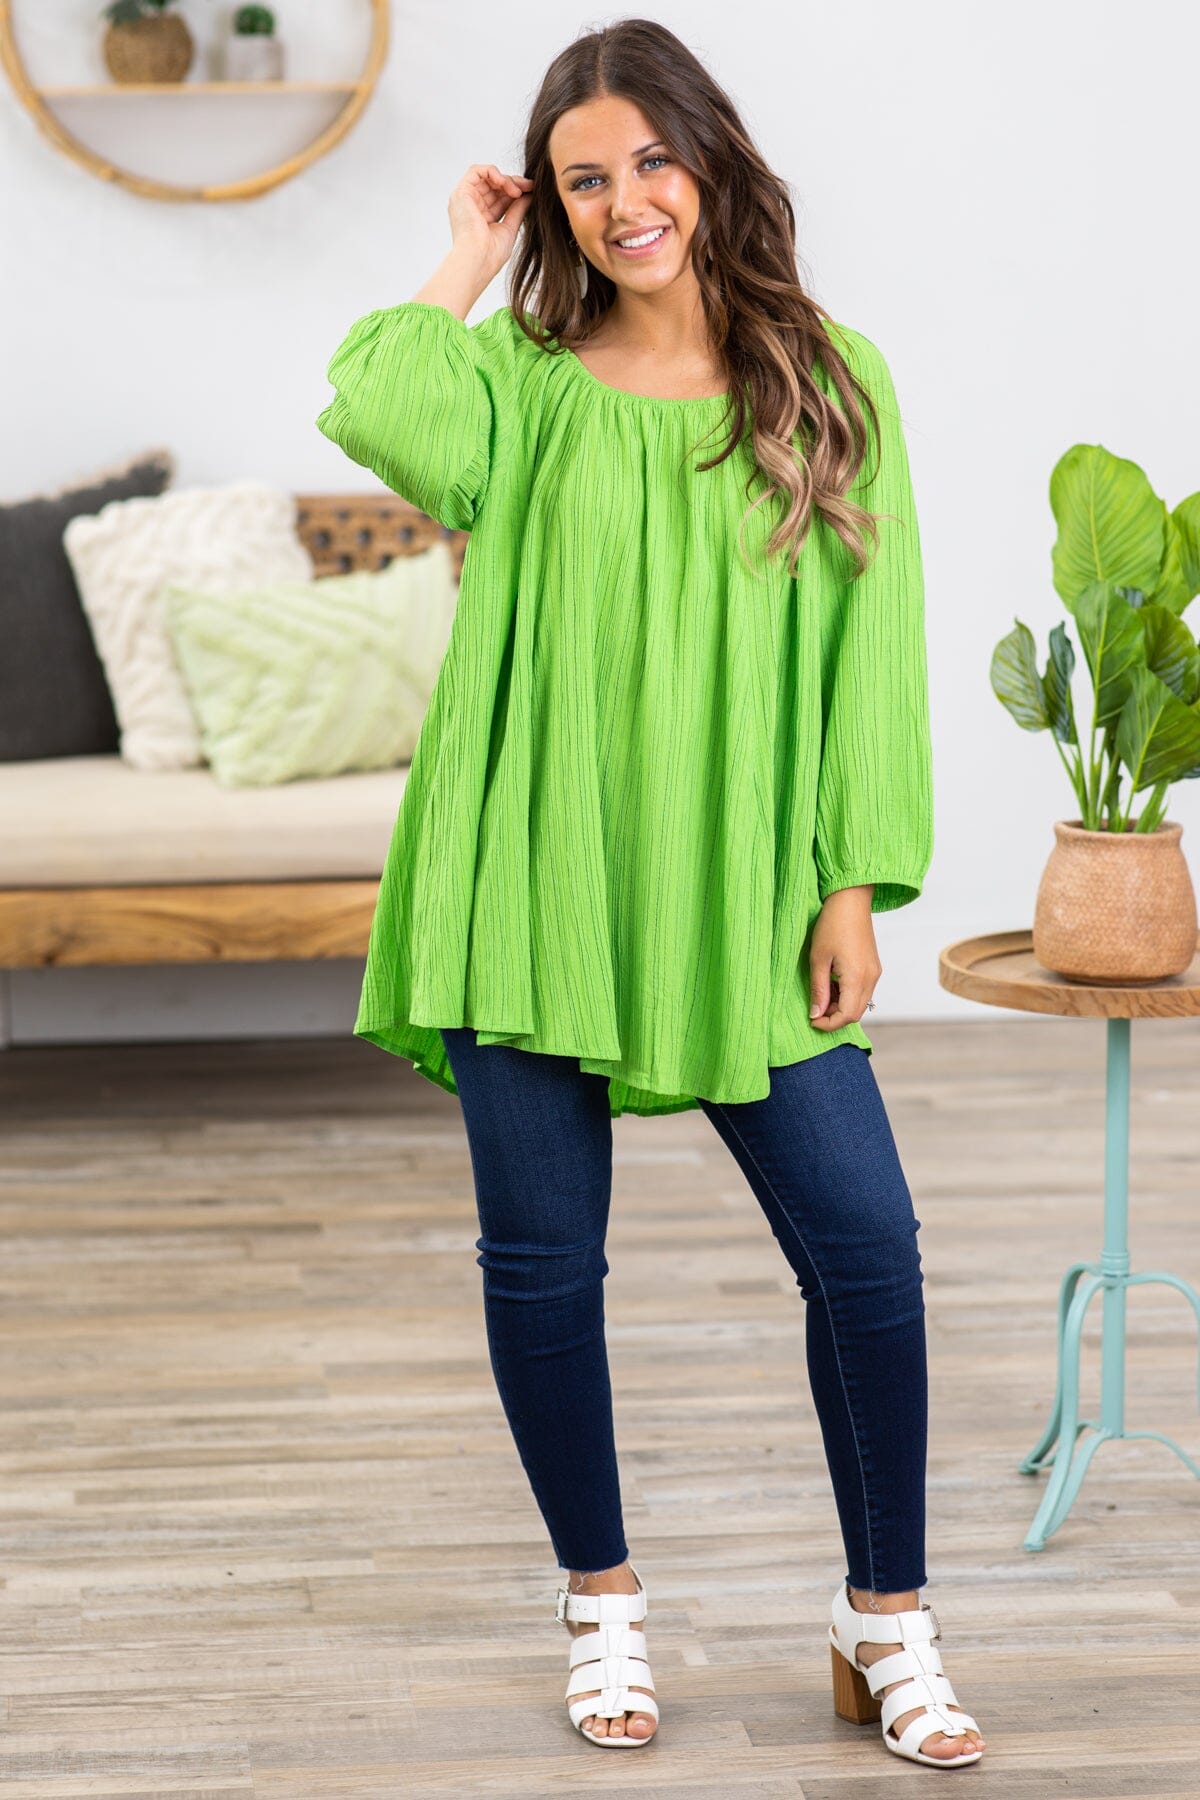 Lime Green Elastic Trim Textured Top - Filly Flair